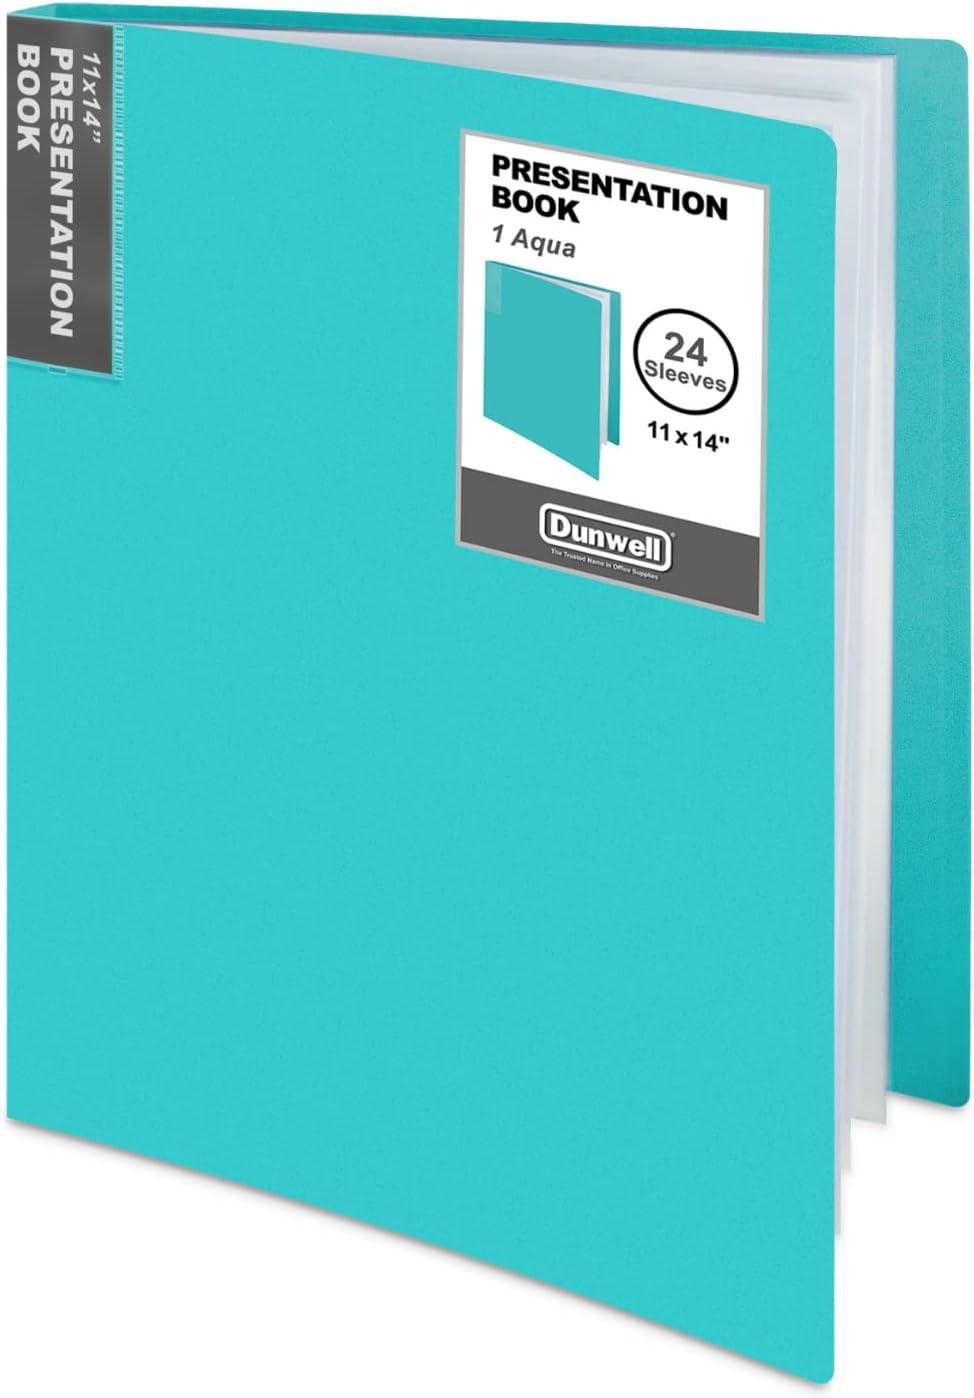  Dunwell Small Binders with Sleeves - Presentation Books  5.5x8.5 (2-Pack, Aqua), 24-Pockets, Displays 48 Half Size Pages or 5.5 x  8.5 Mini Booklets, Acid-Free Archival Quality : Office Products